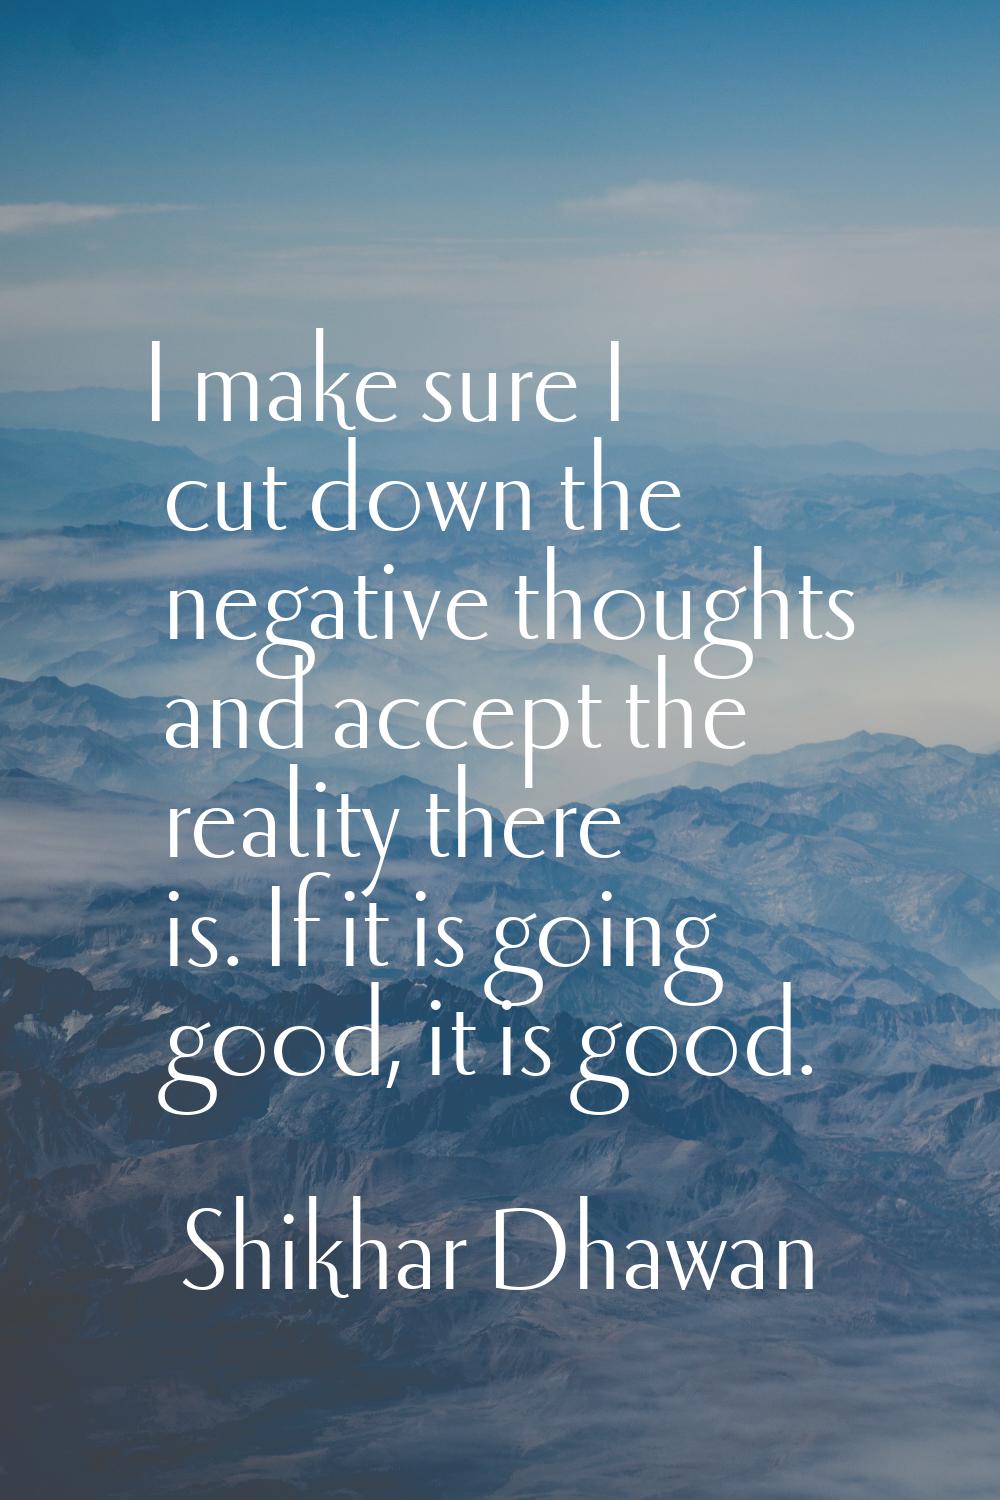 I make sure I cut down the negative thoughts and accept the reality there is. If it is going good, 